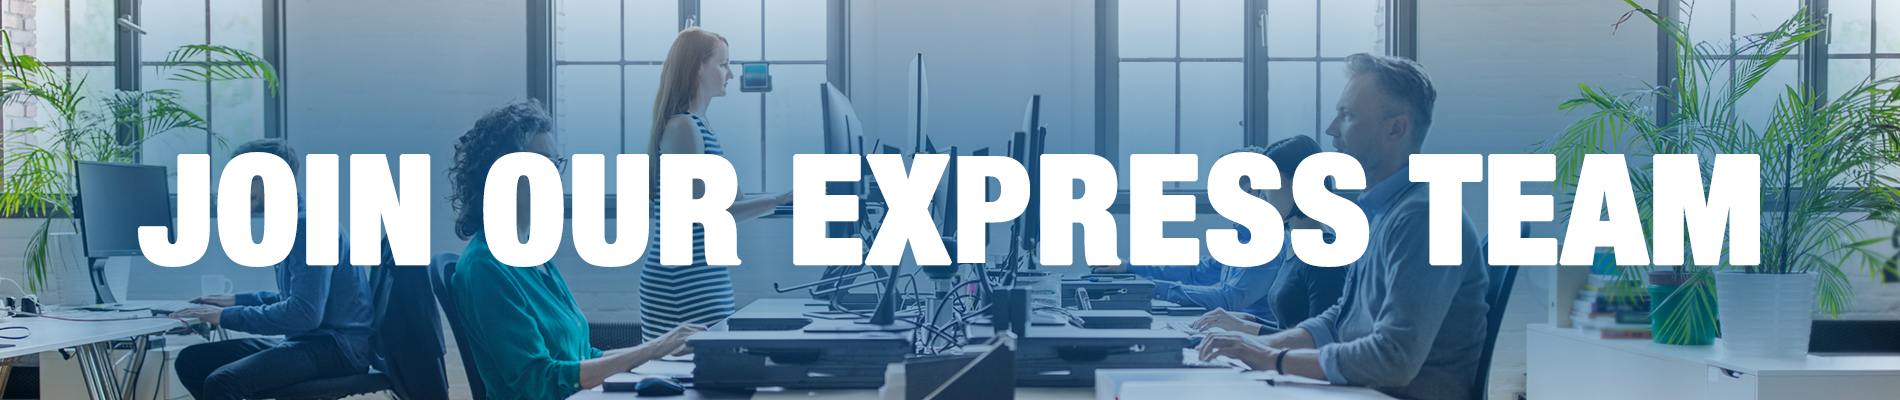 Join Our Express Team